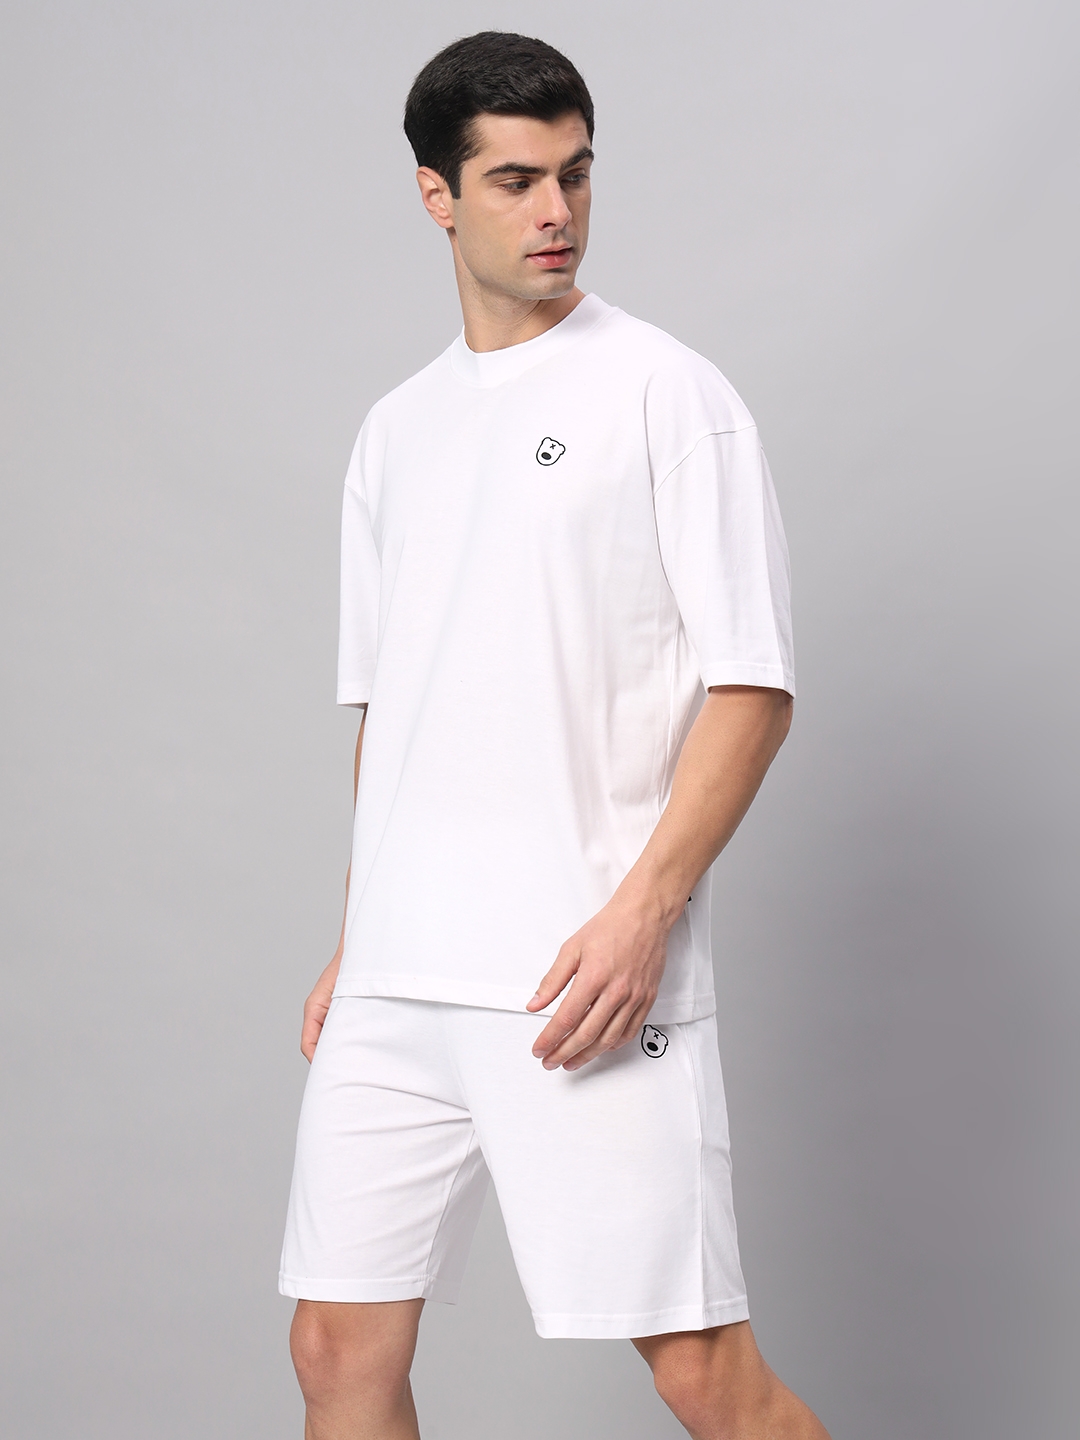 GRIFFEL | Men's White Cotton Loose Printed   Co-ords